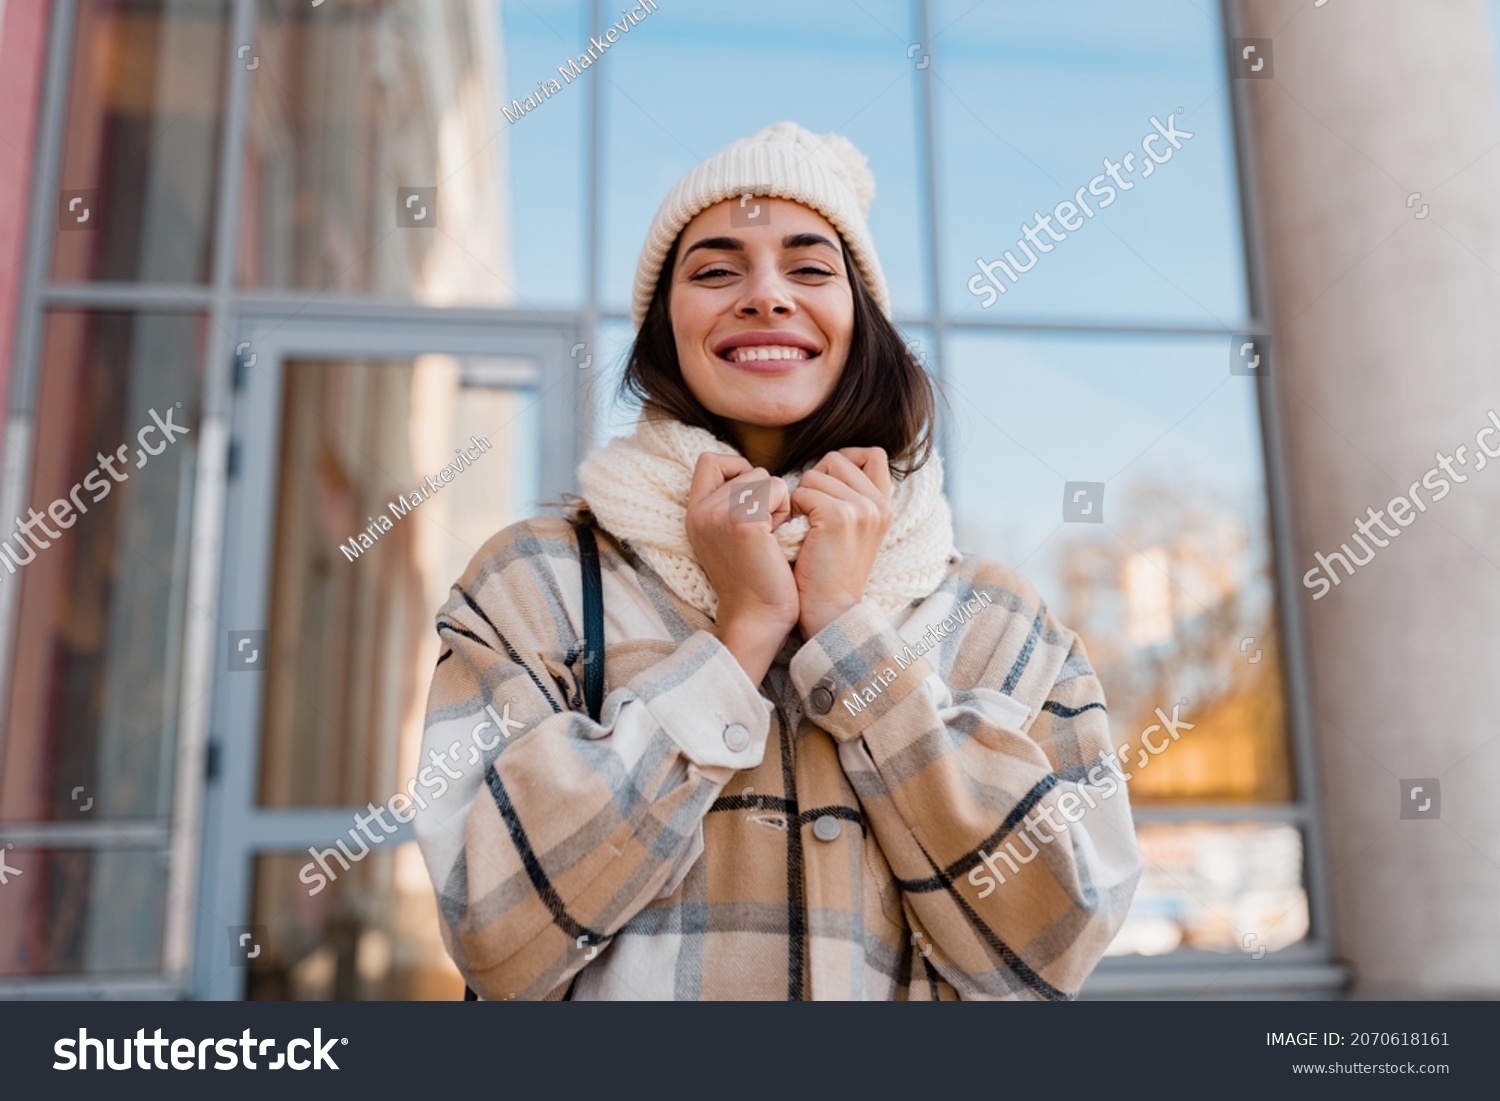 stylish attractive young smiling woman walking in street in winter outfit with coffee wearing checkered coat, white knitted hat and scarf, happy mood, fashion style trend #2070618161